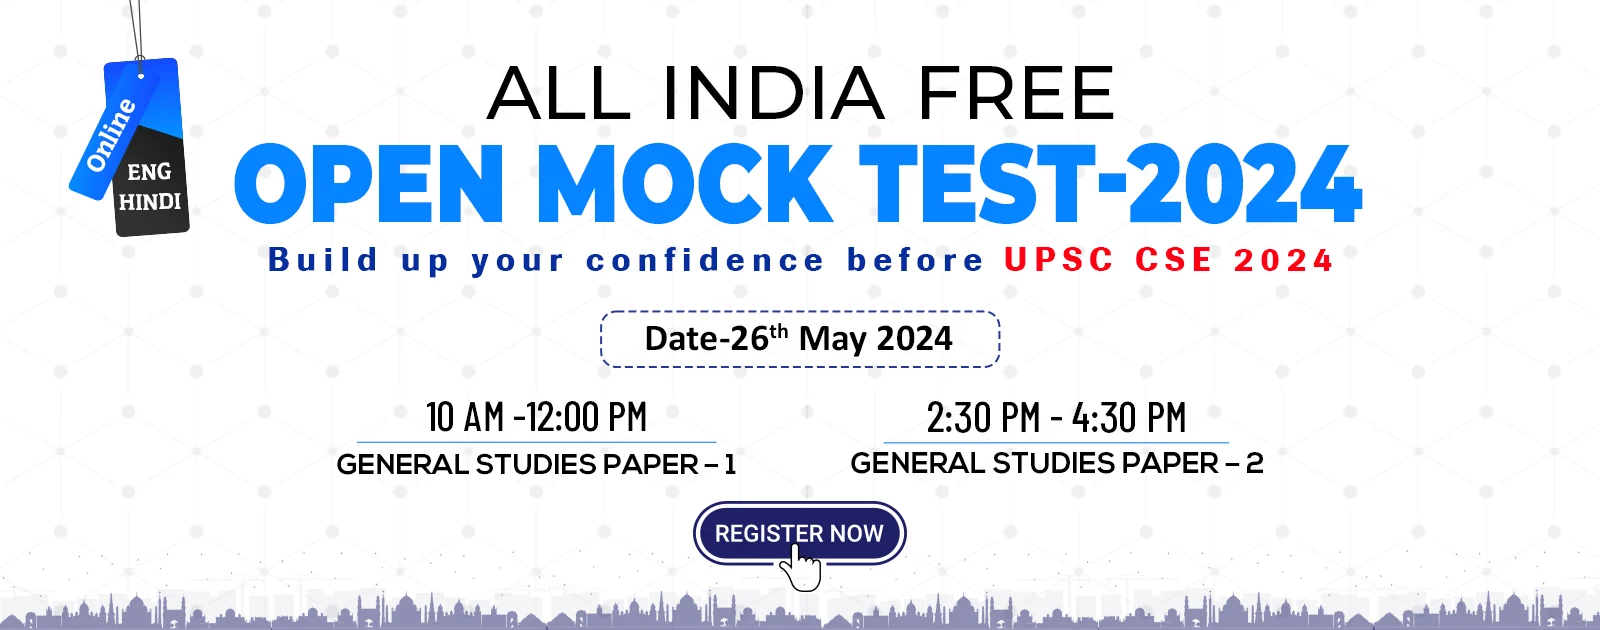 all india open mock test